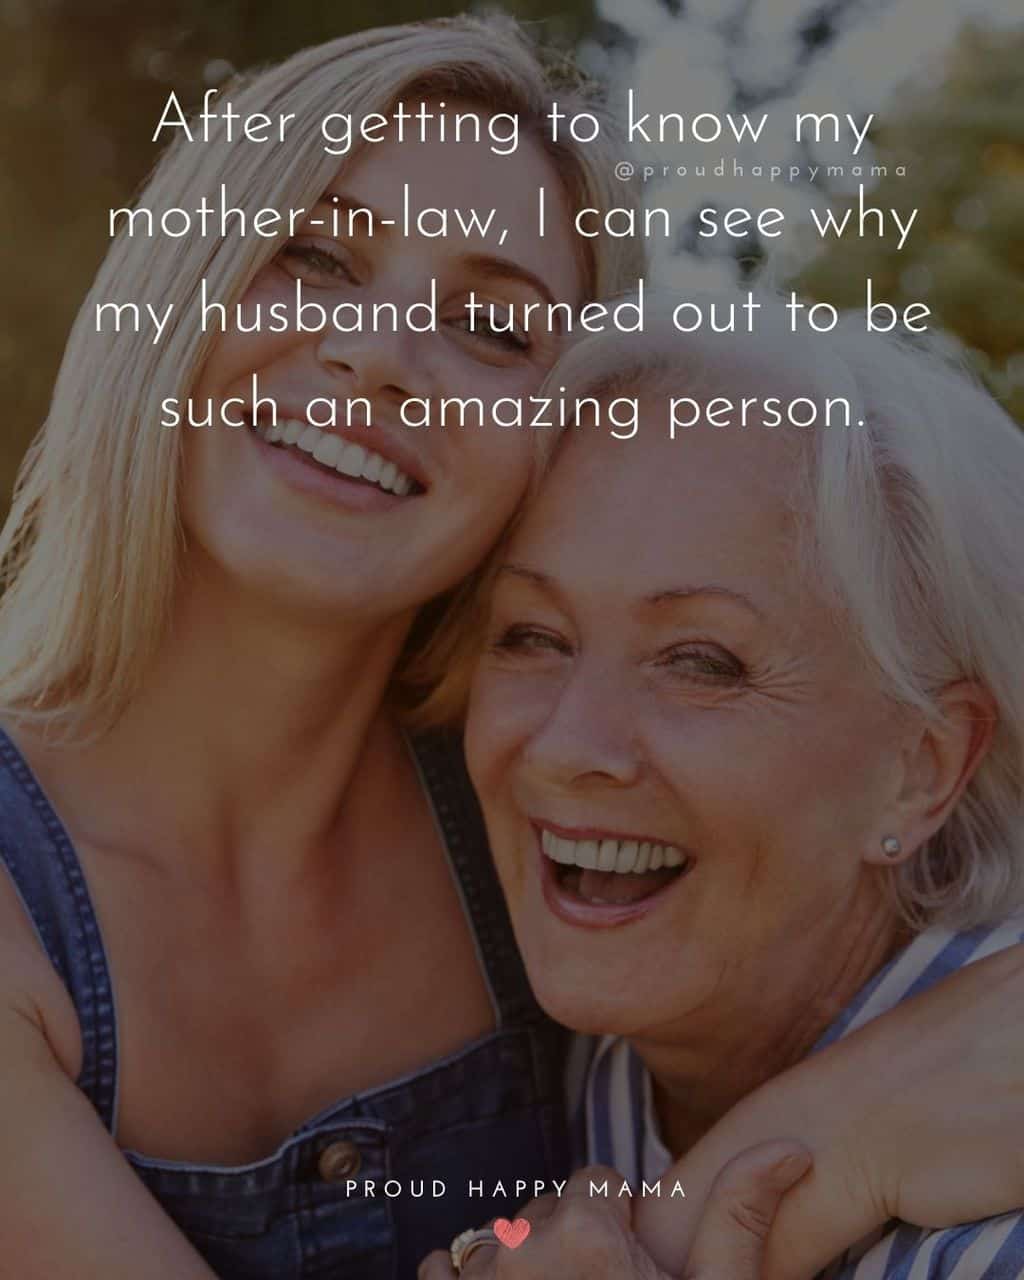 70+ BEST Mother In Law Quotes And Sayings [With Images]